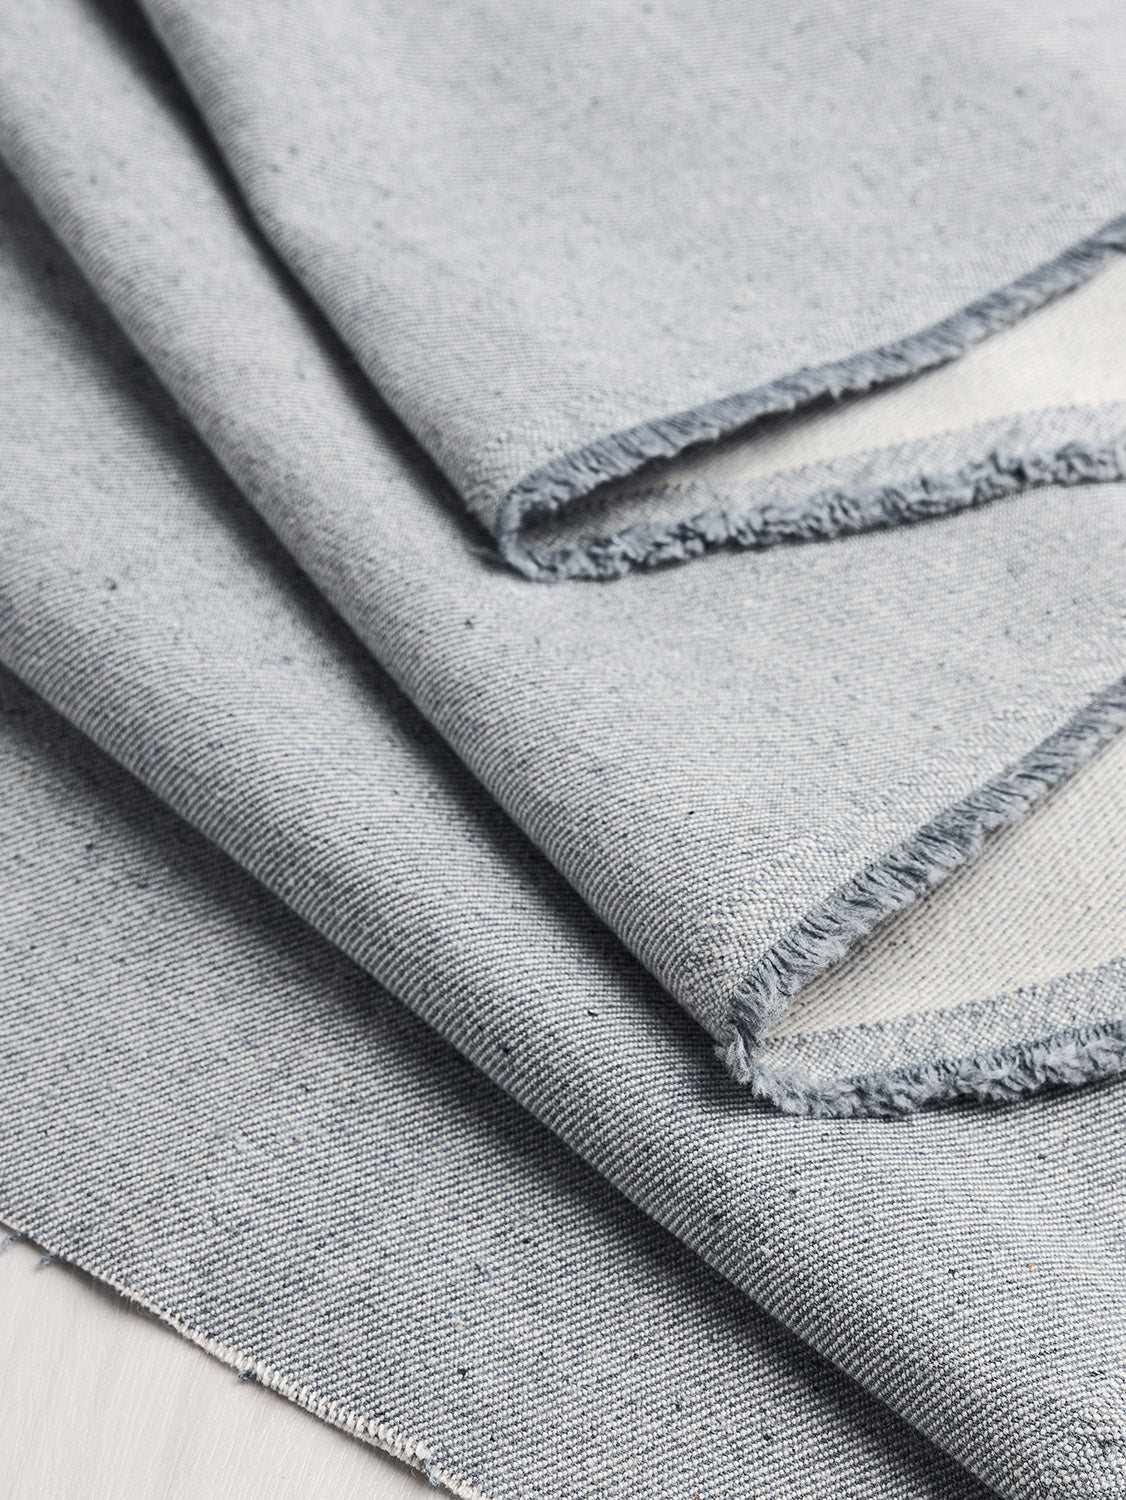 All About Denim: Understanding this Classic Textile – Core Fabrics